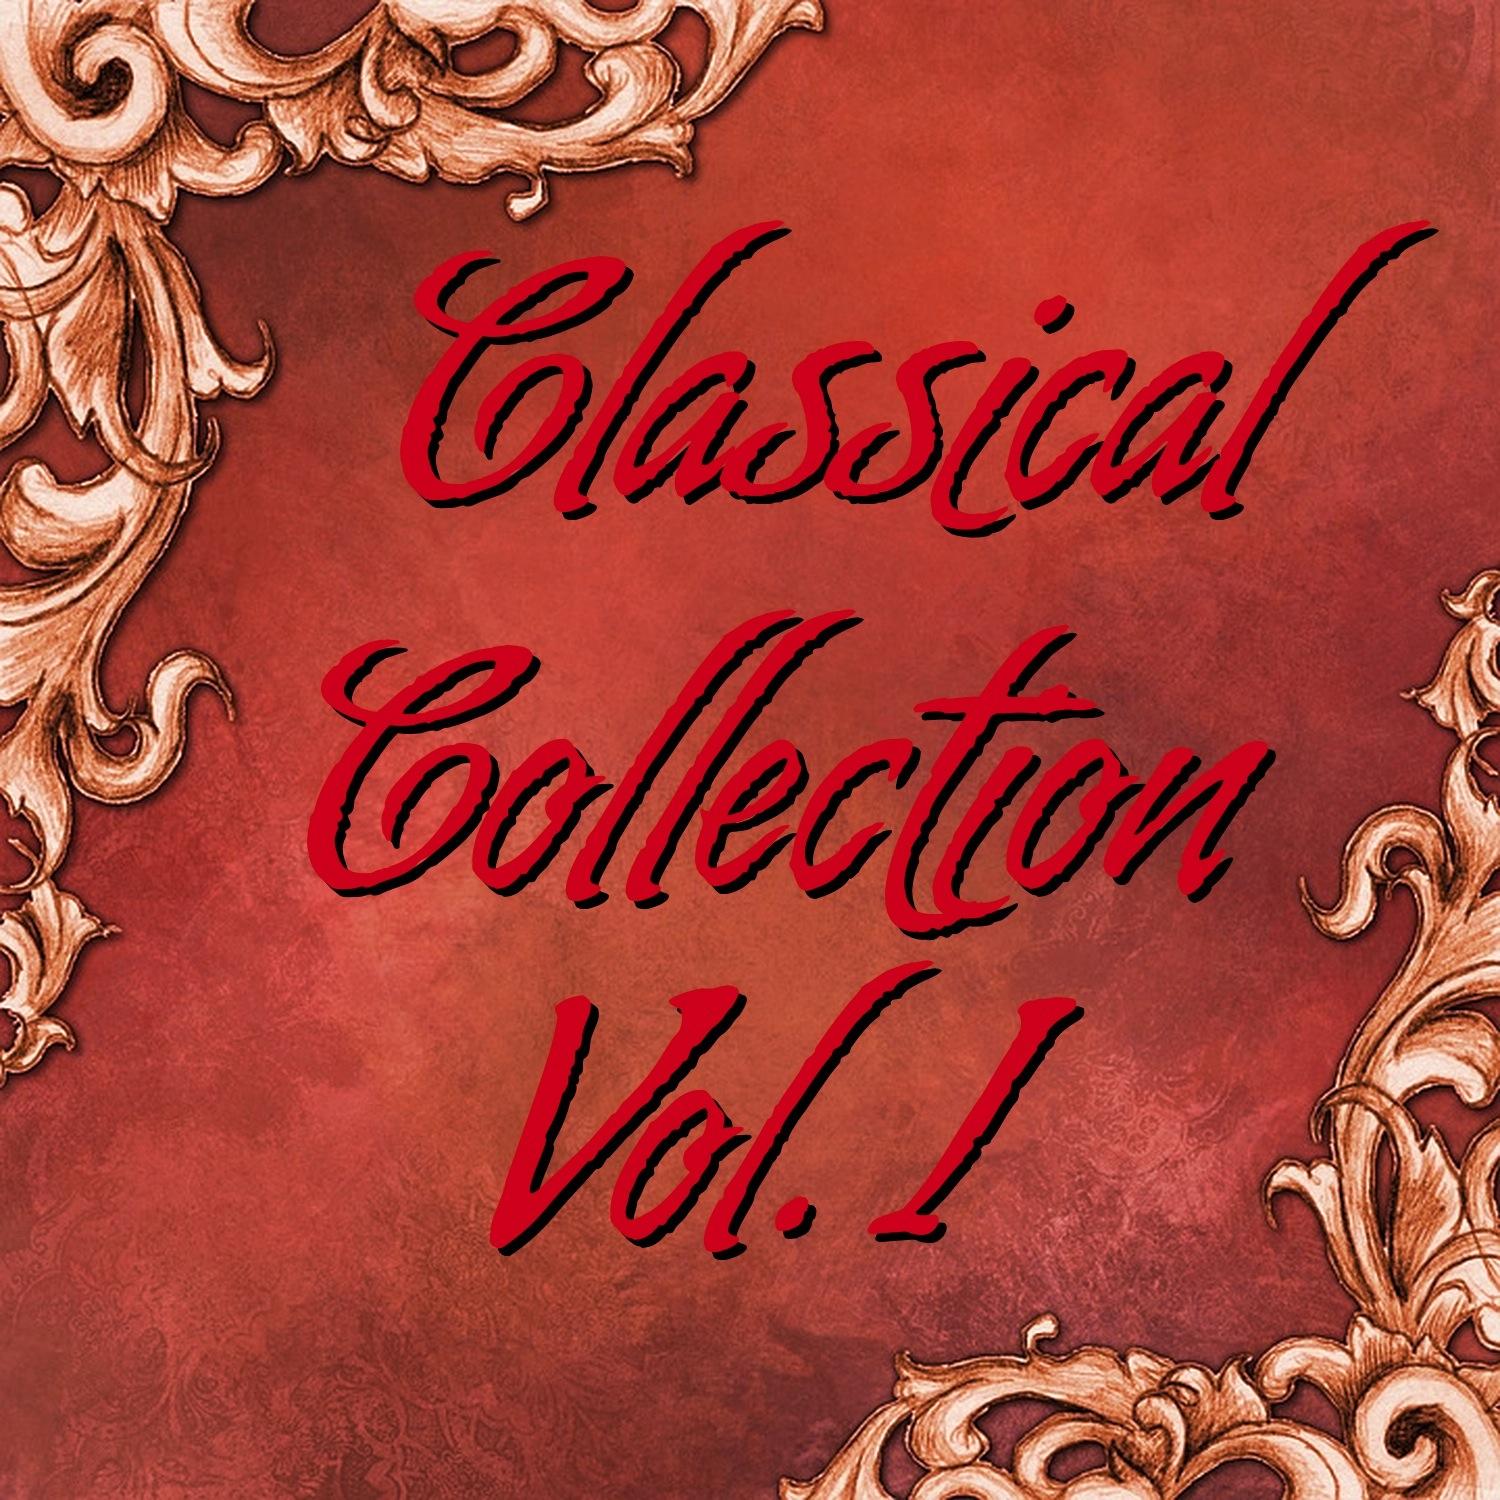 Classical Collection Vol.I